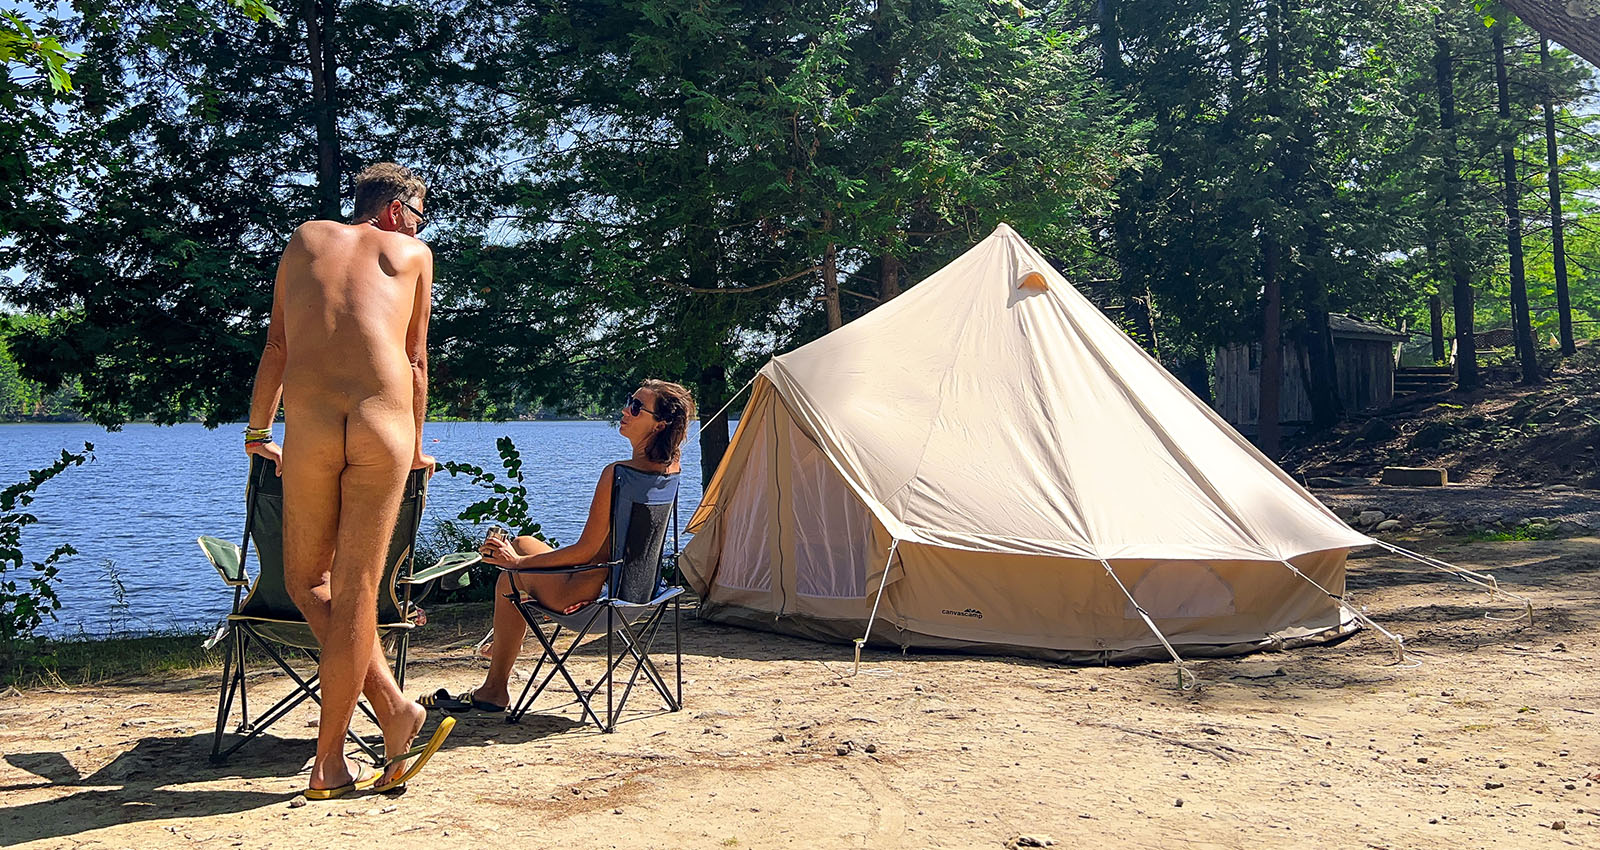 Nude tent